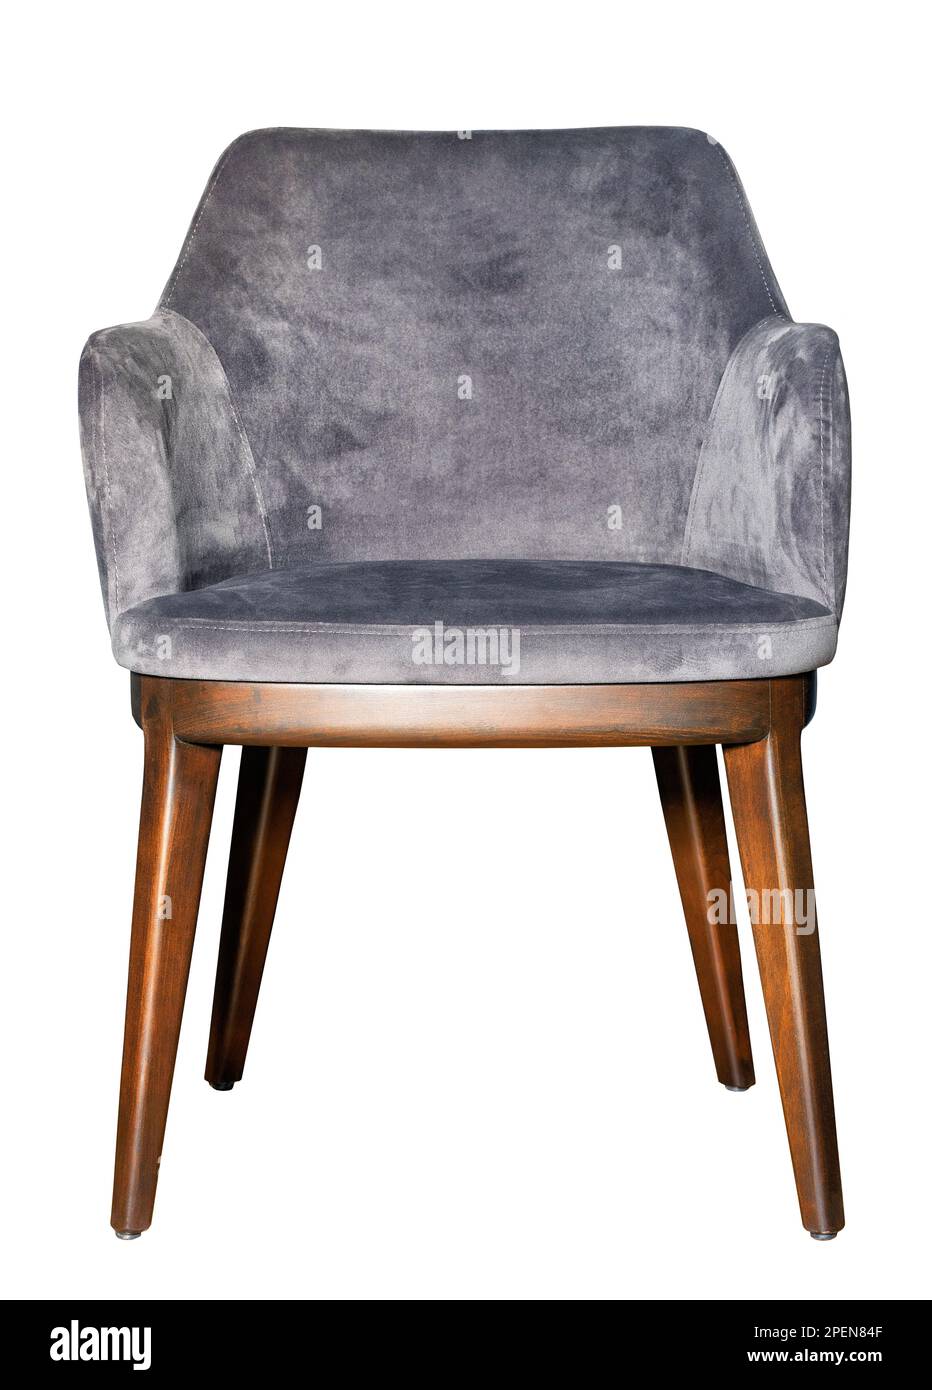 Velor armchair with soft gray upholstery and dark brown polished wooden legs. The image is isolated on a white background. Stock Photo